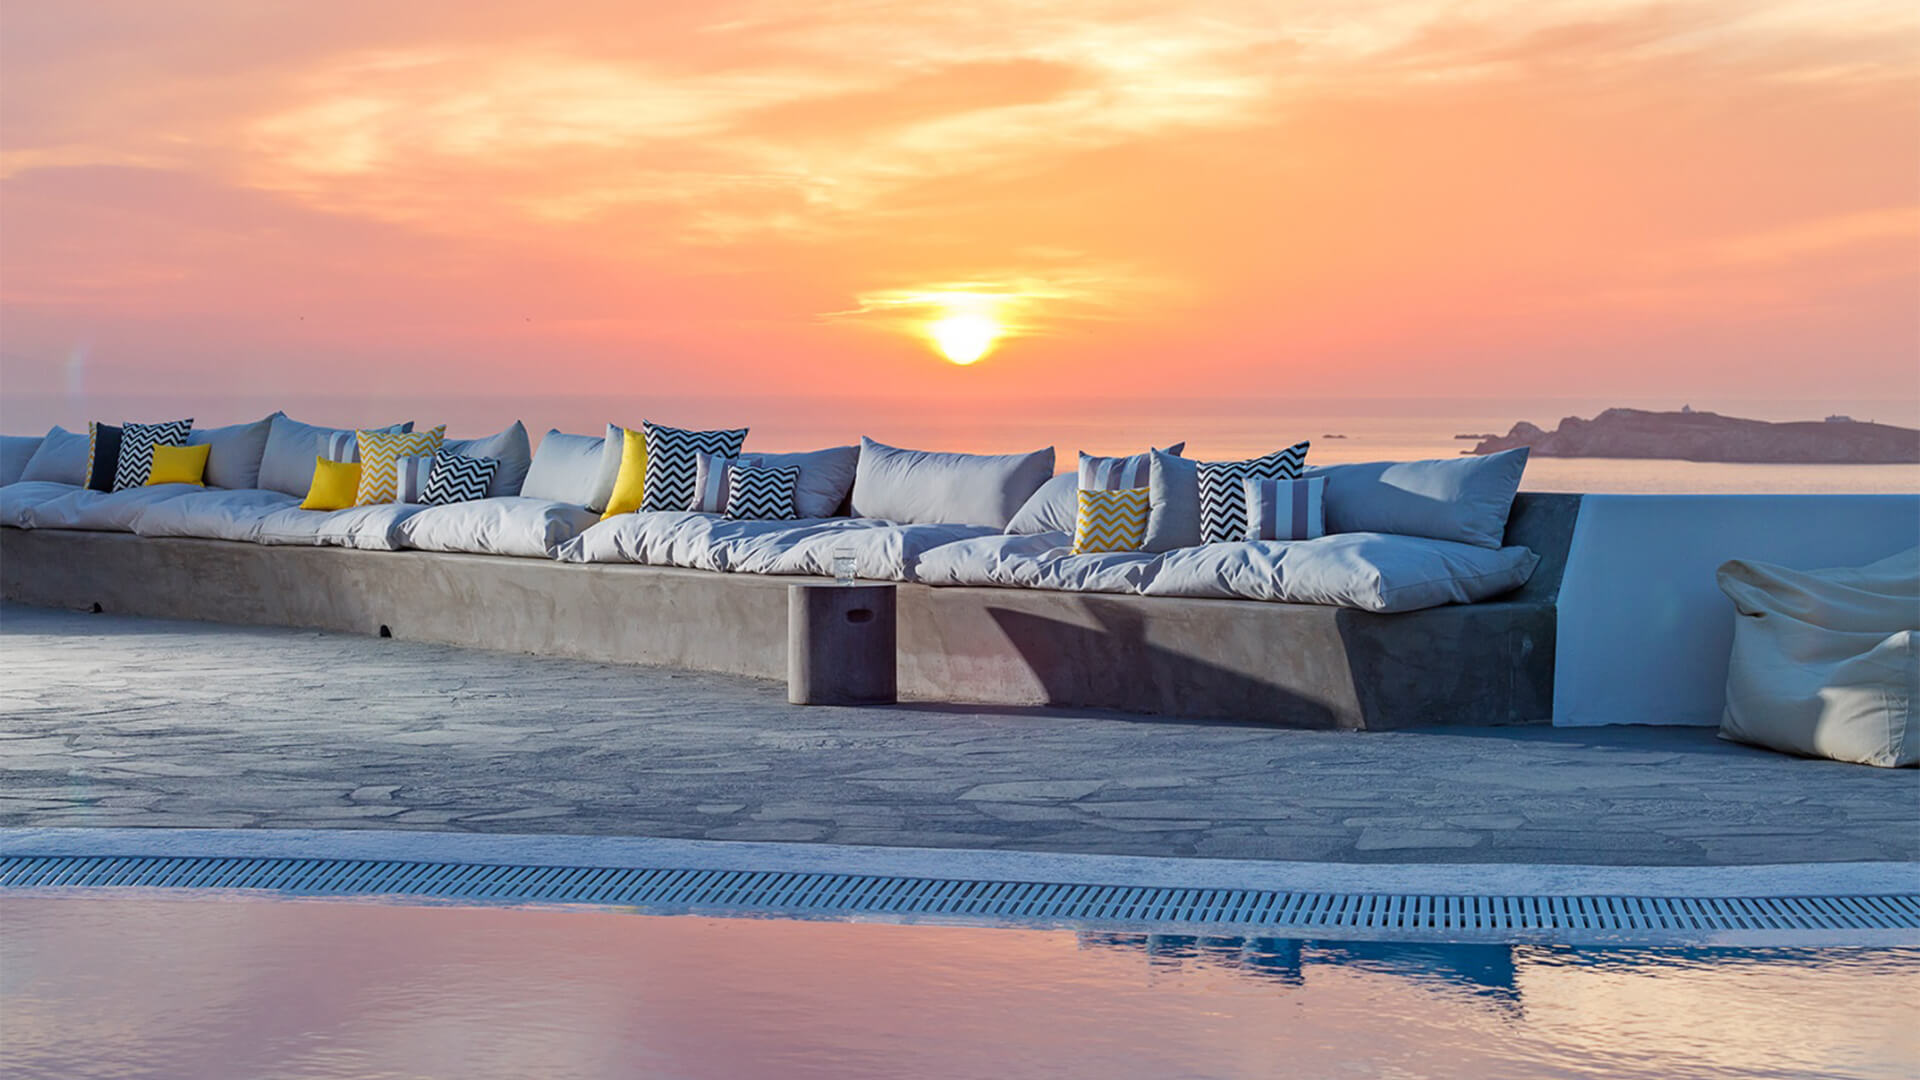 Stone seating area with cushions with a pink sunset behind